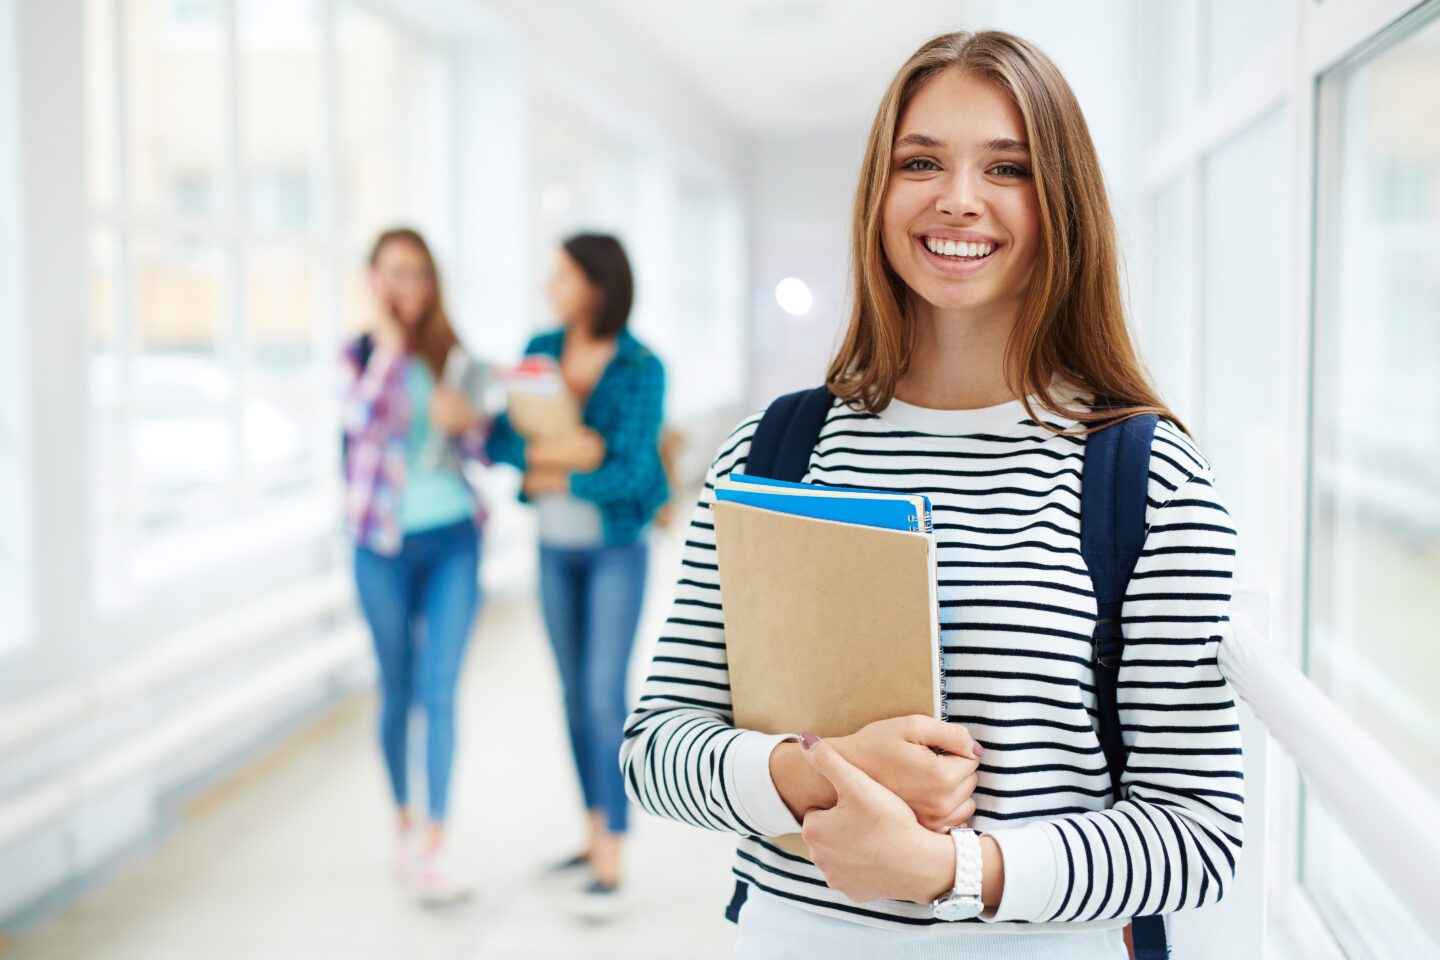 A Level Geography student, wearing a striped long sleeved top holding her books and smiling.